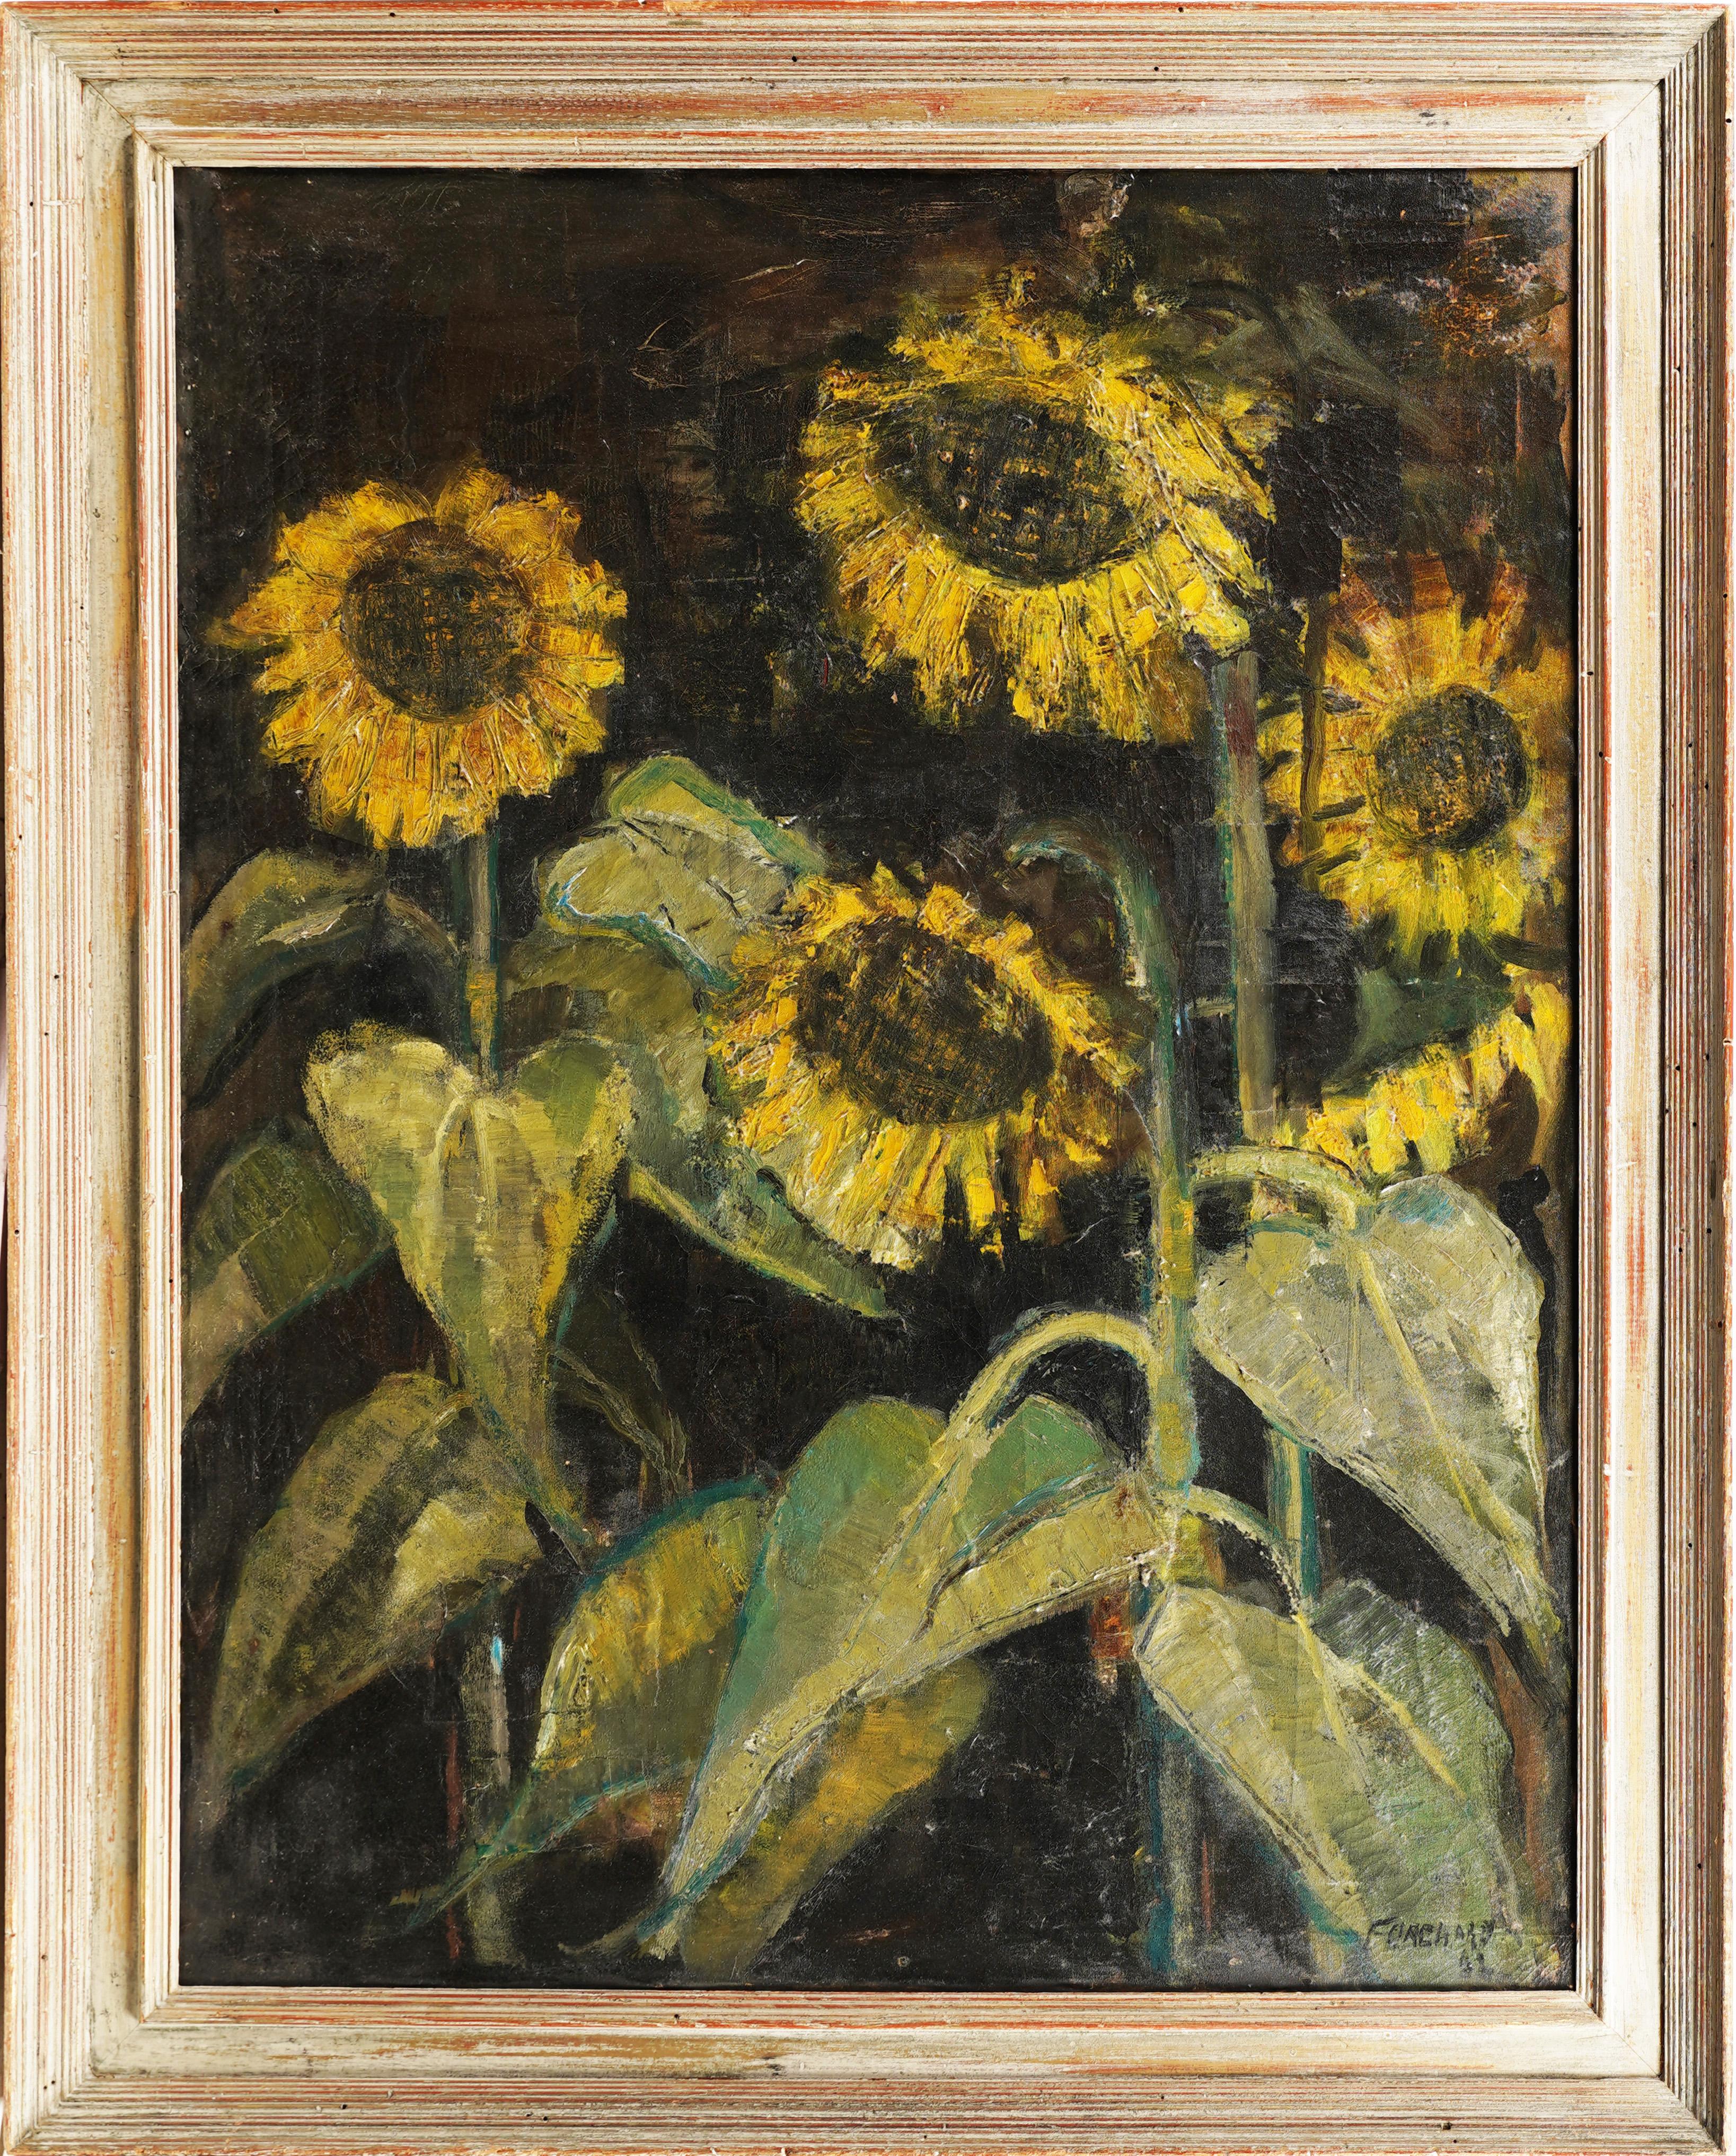 Antique American modernist signed sunflower still life oil painting.  Oil on canvas.  Signed.  Framed.  Image size, 28L x 36H.